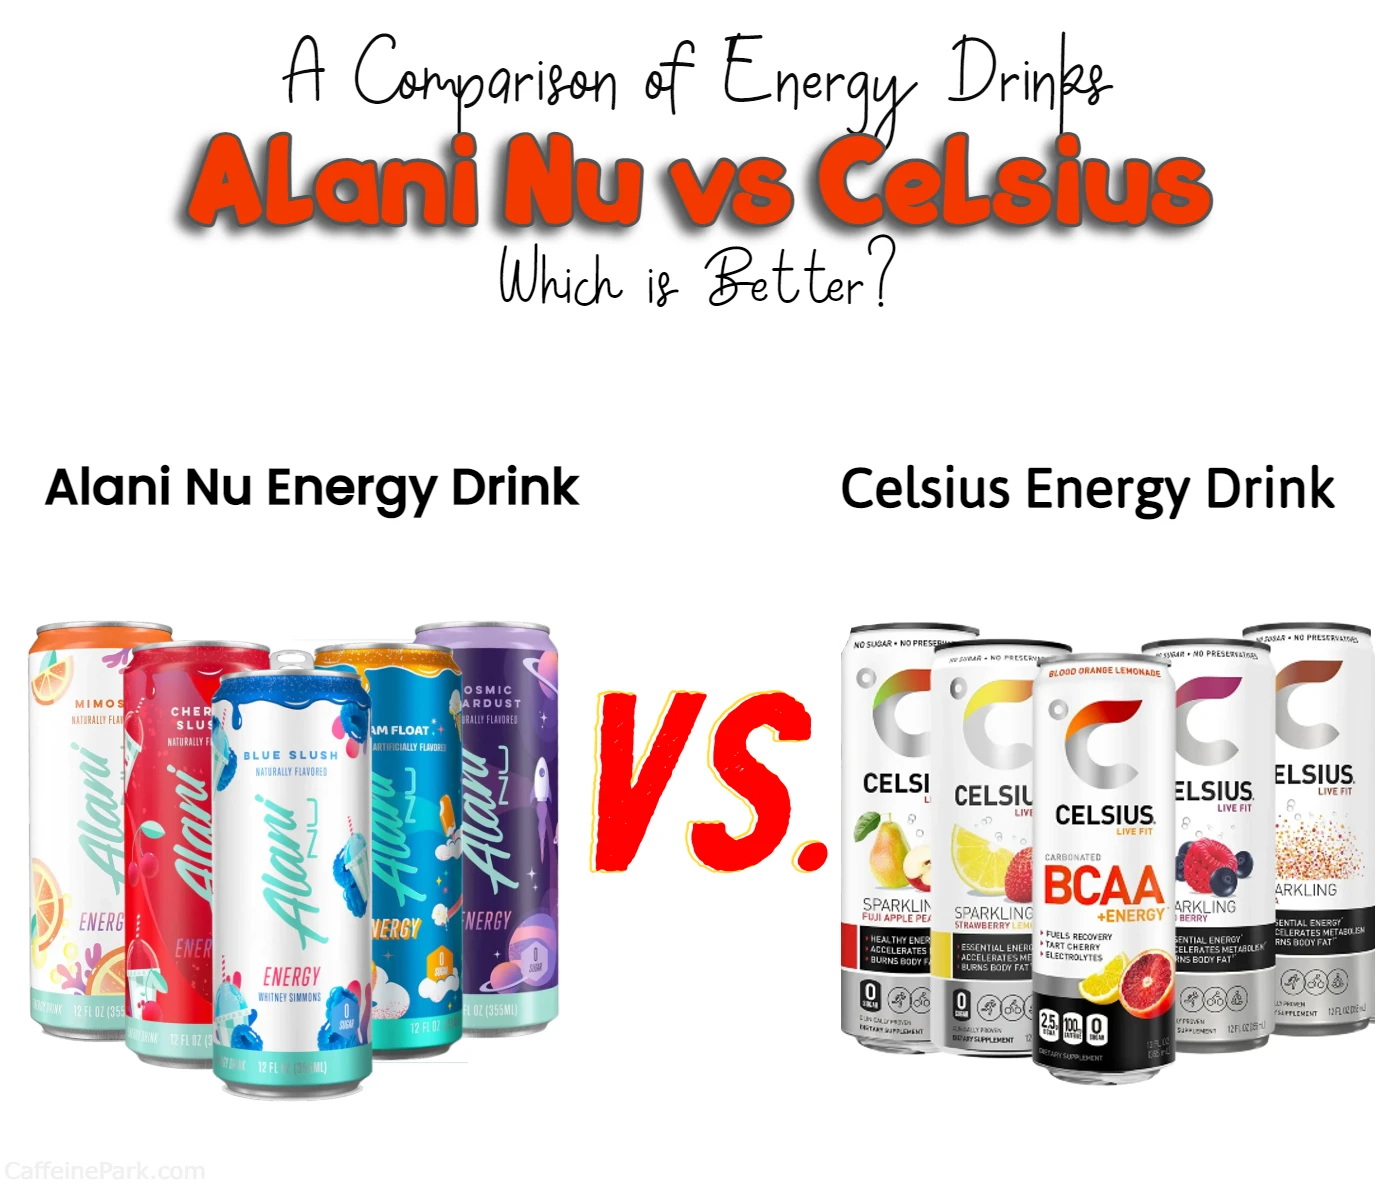 difference between Celsius energy drink and Alani nu energy drink